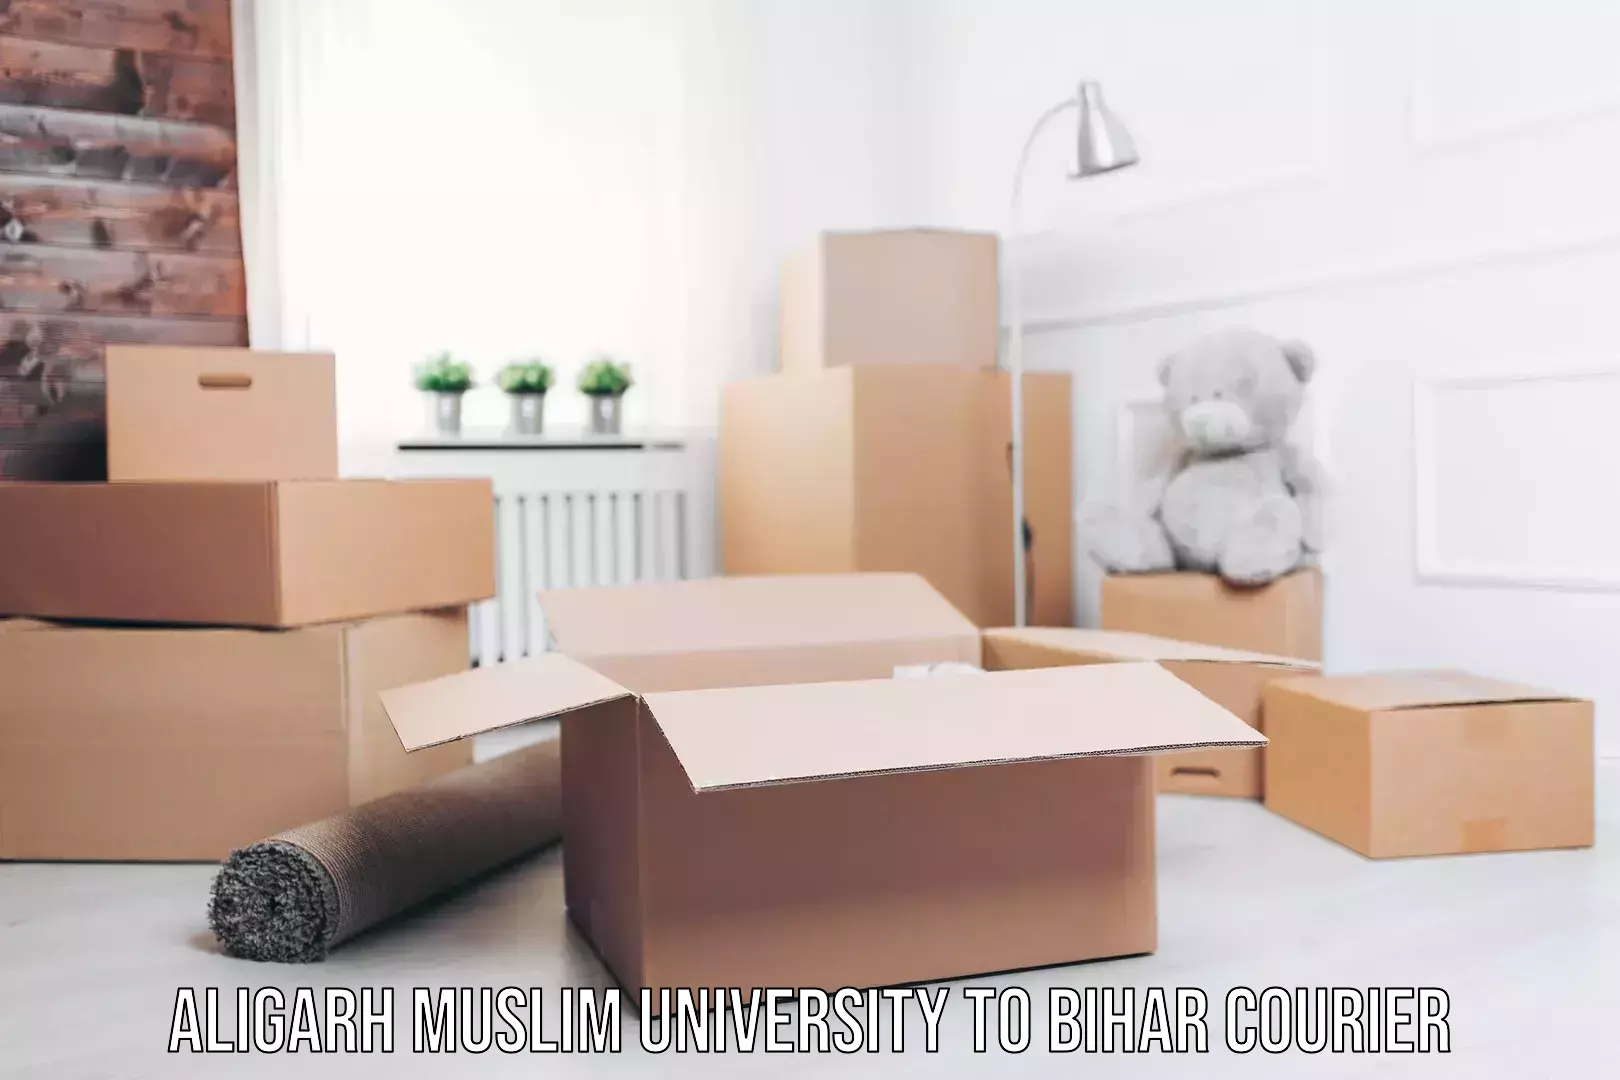 Tailored delivery services Aligarh Muslim University to Bihar